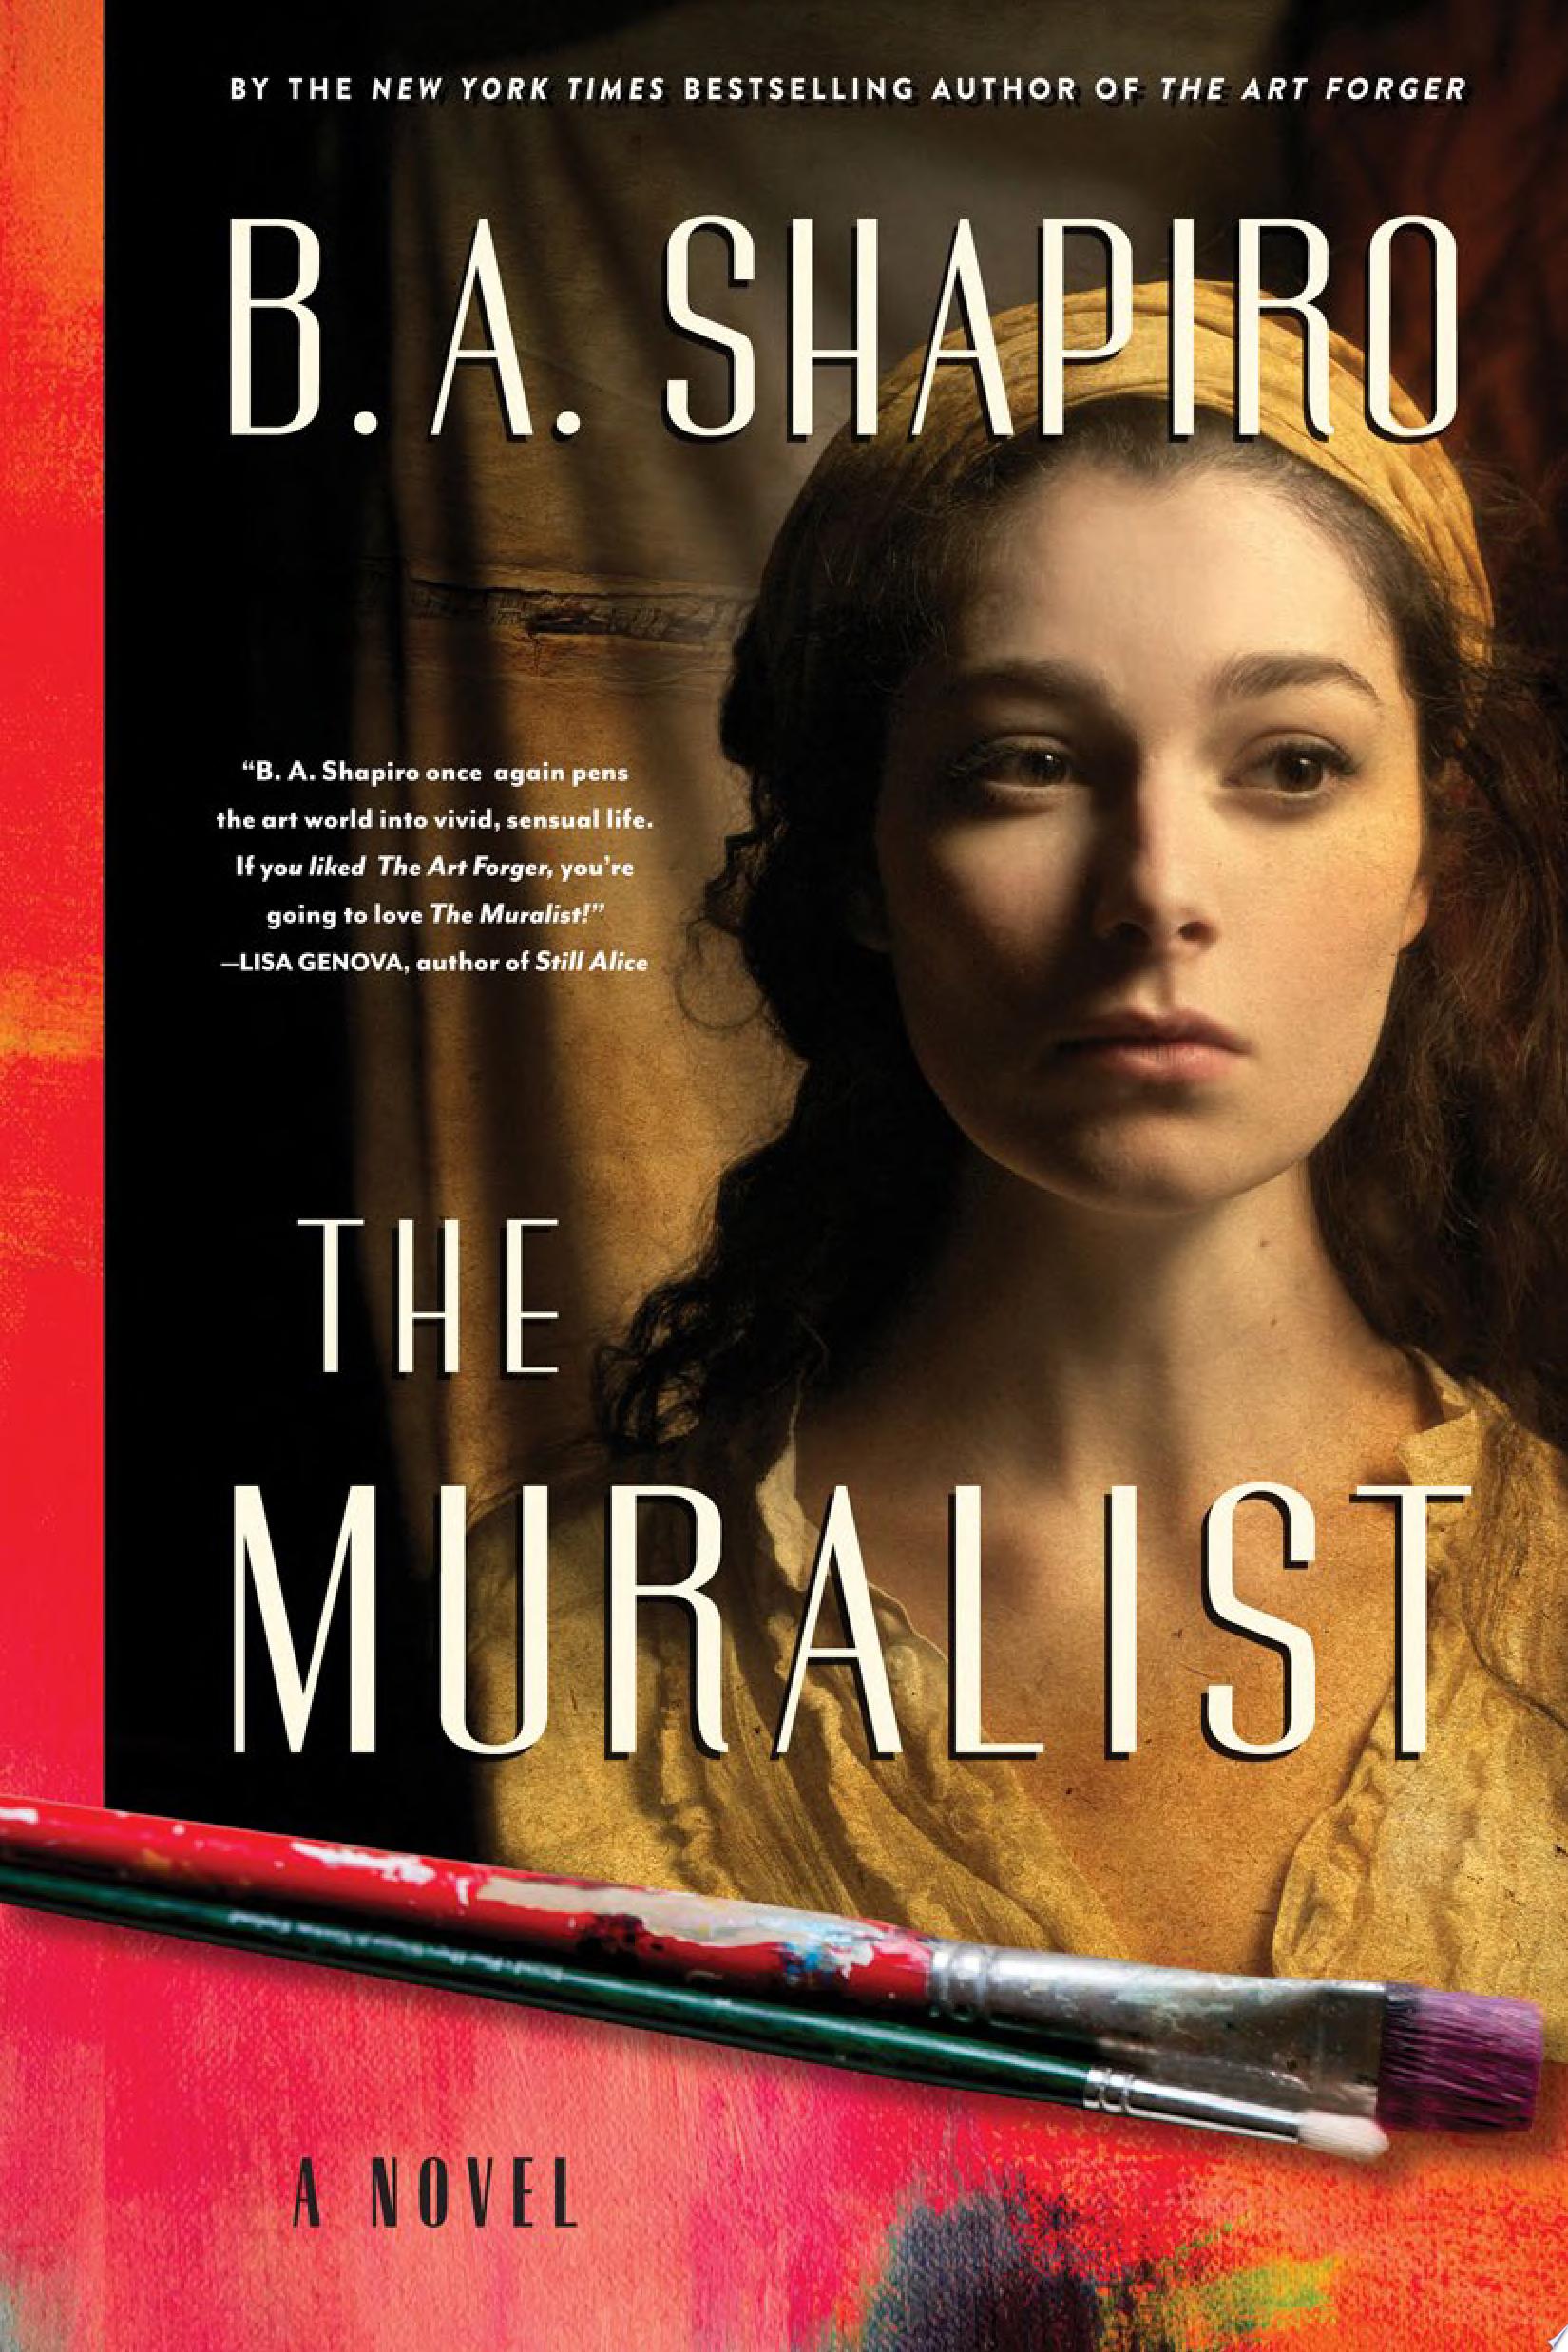 Image for "The Muralist"